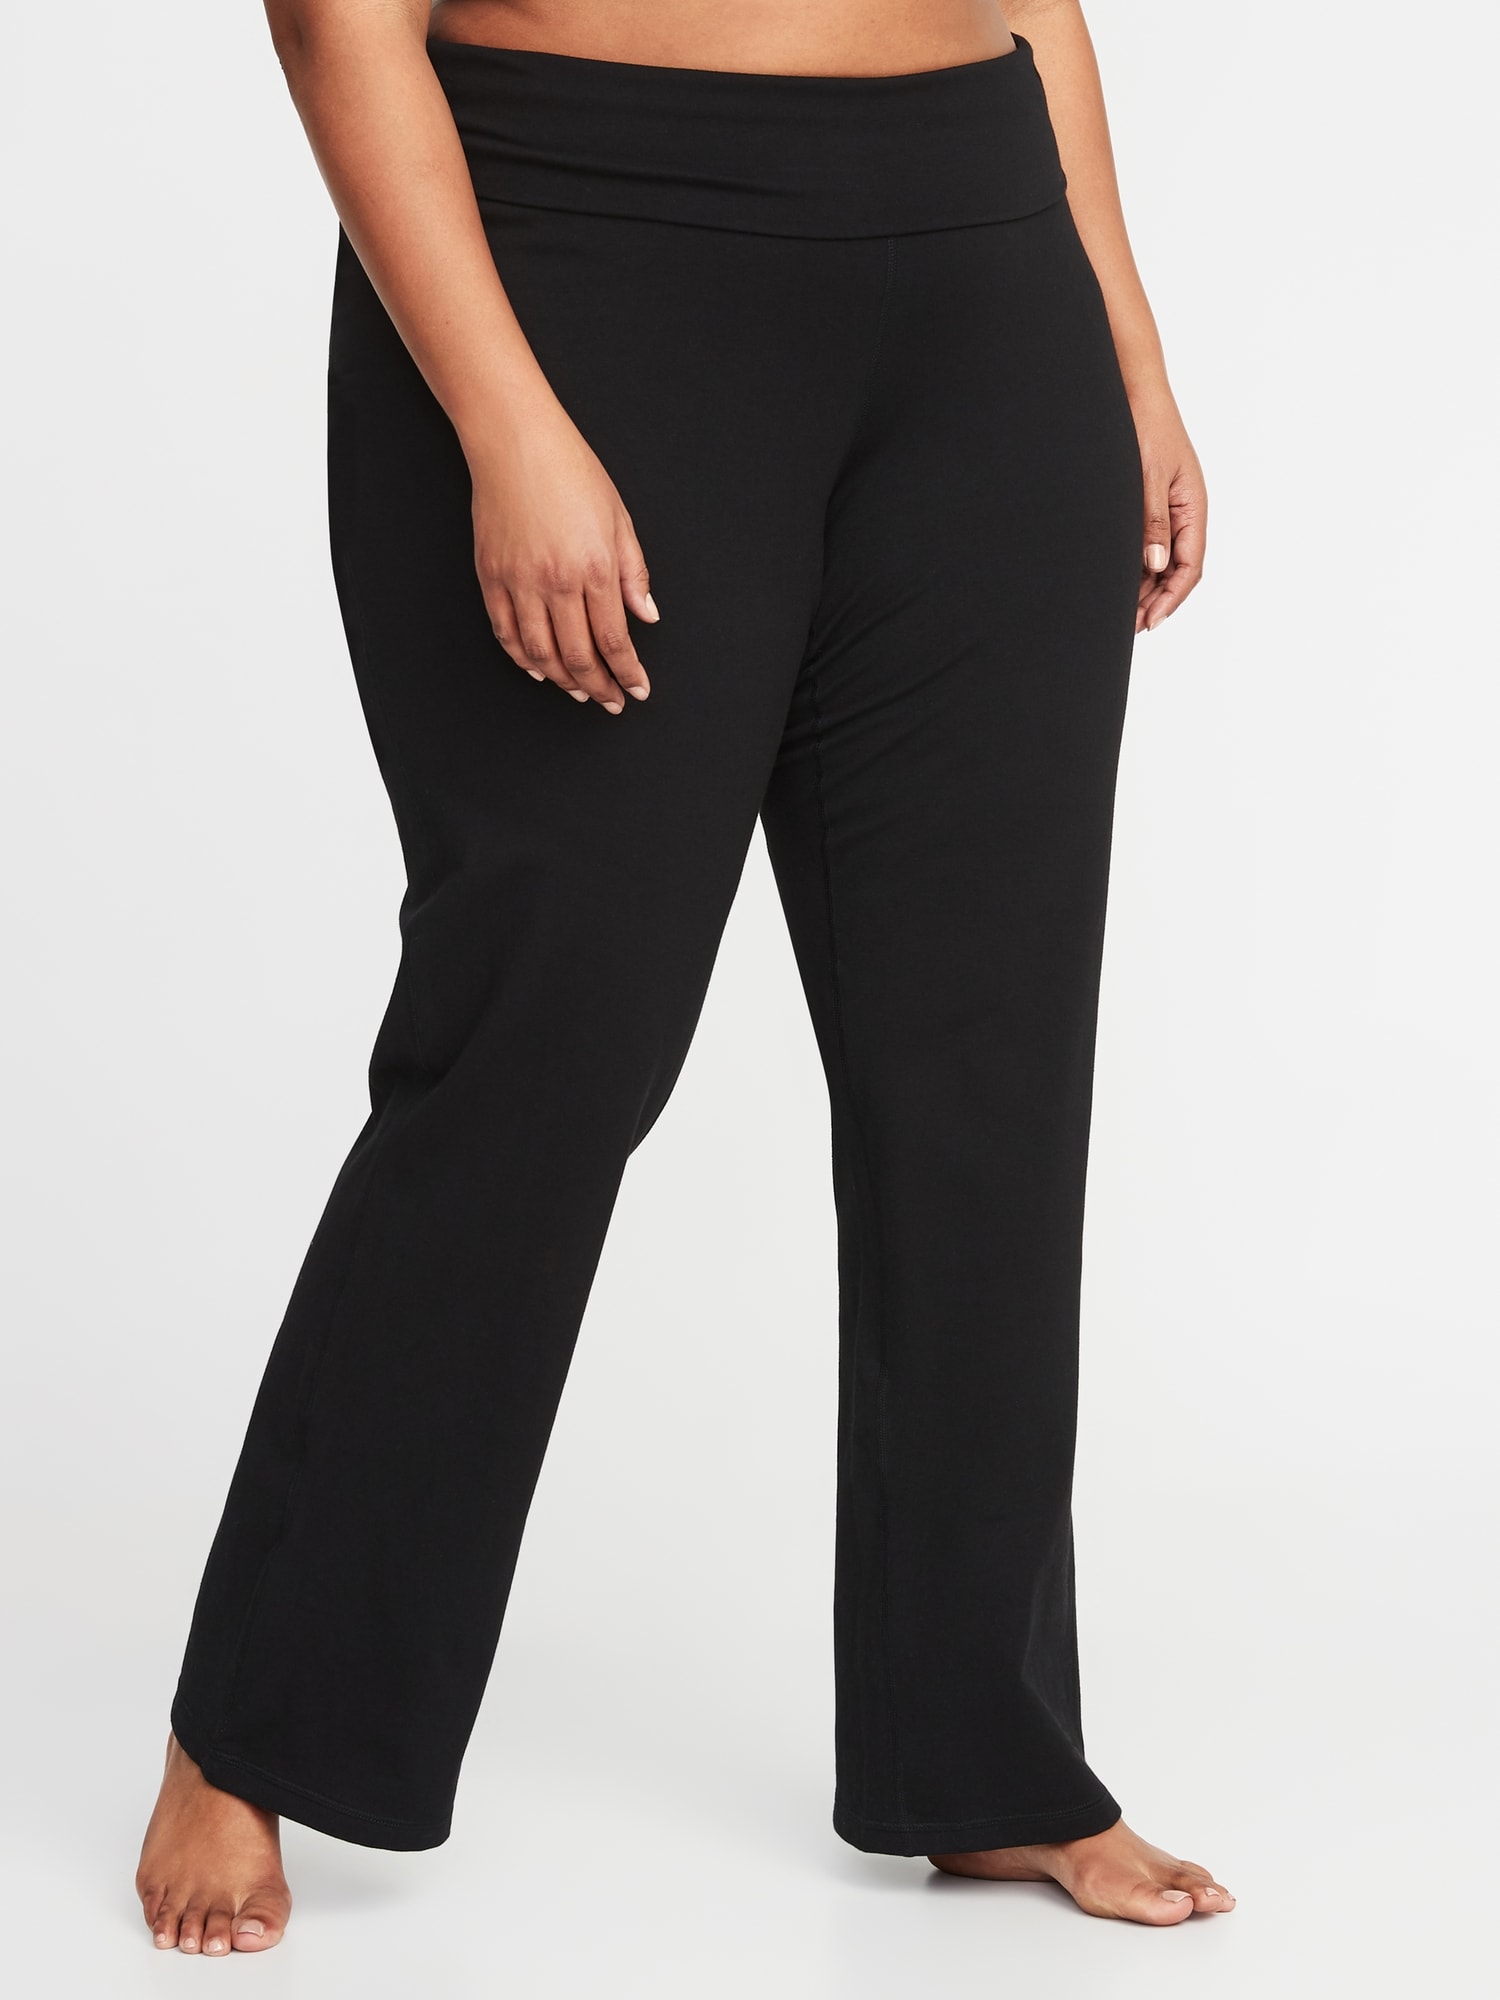 Roll-Over 4-Way-Stretch Plus-Size Yoga Pants